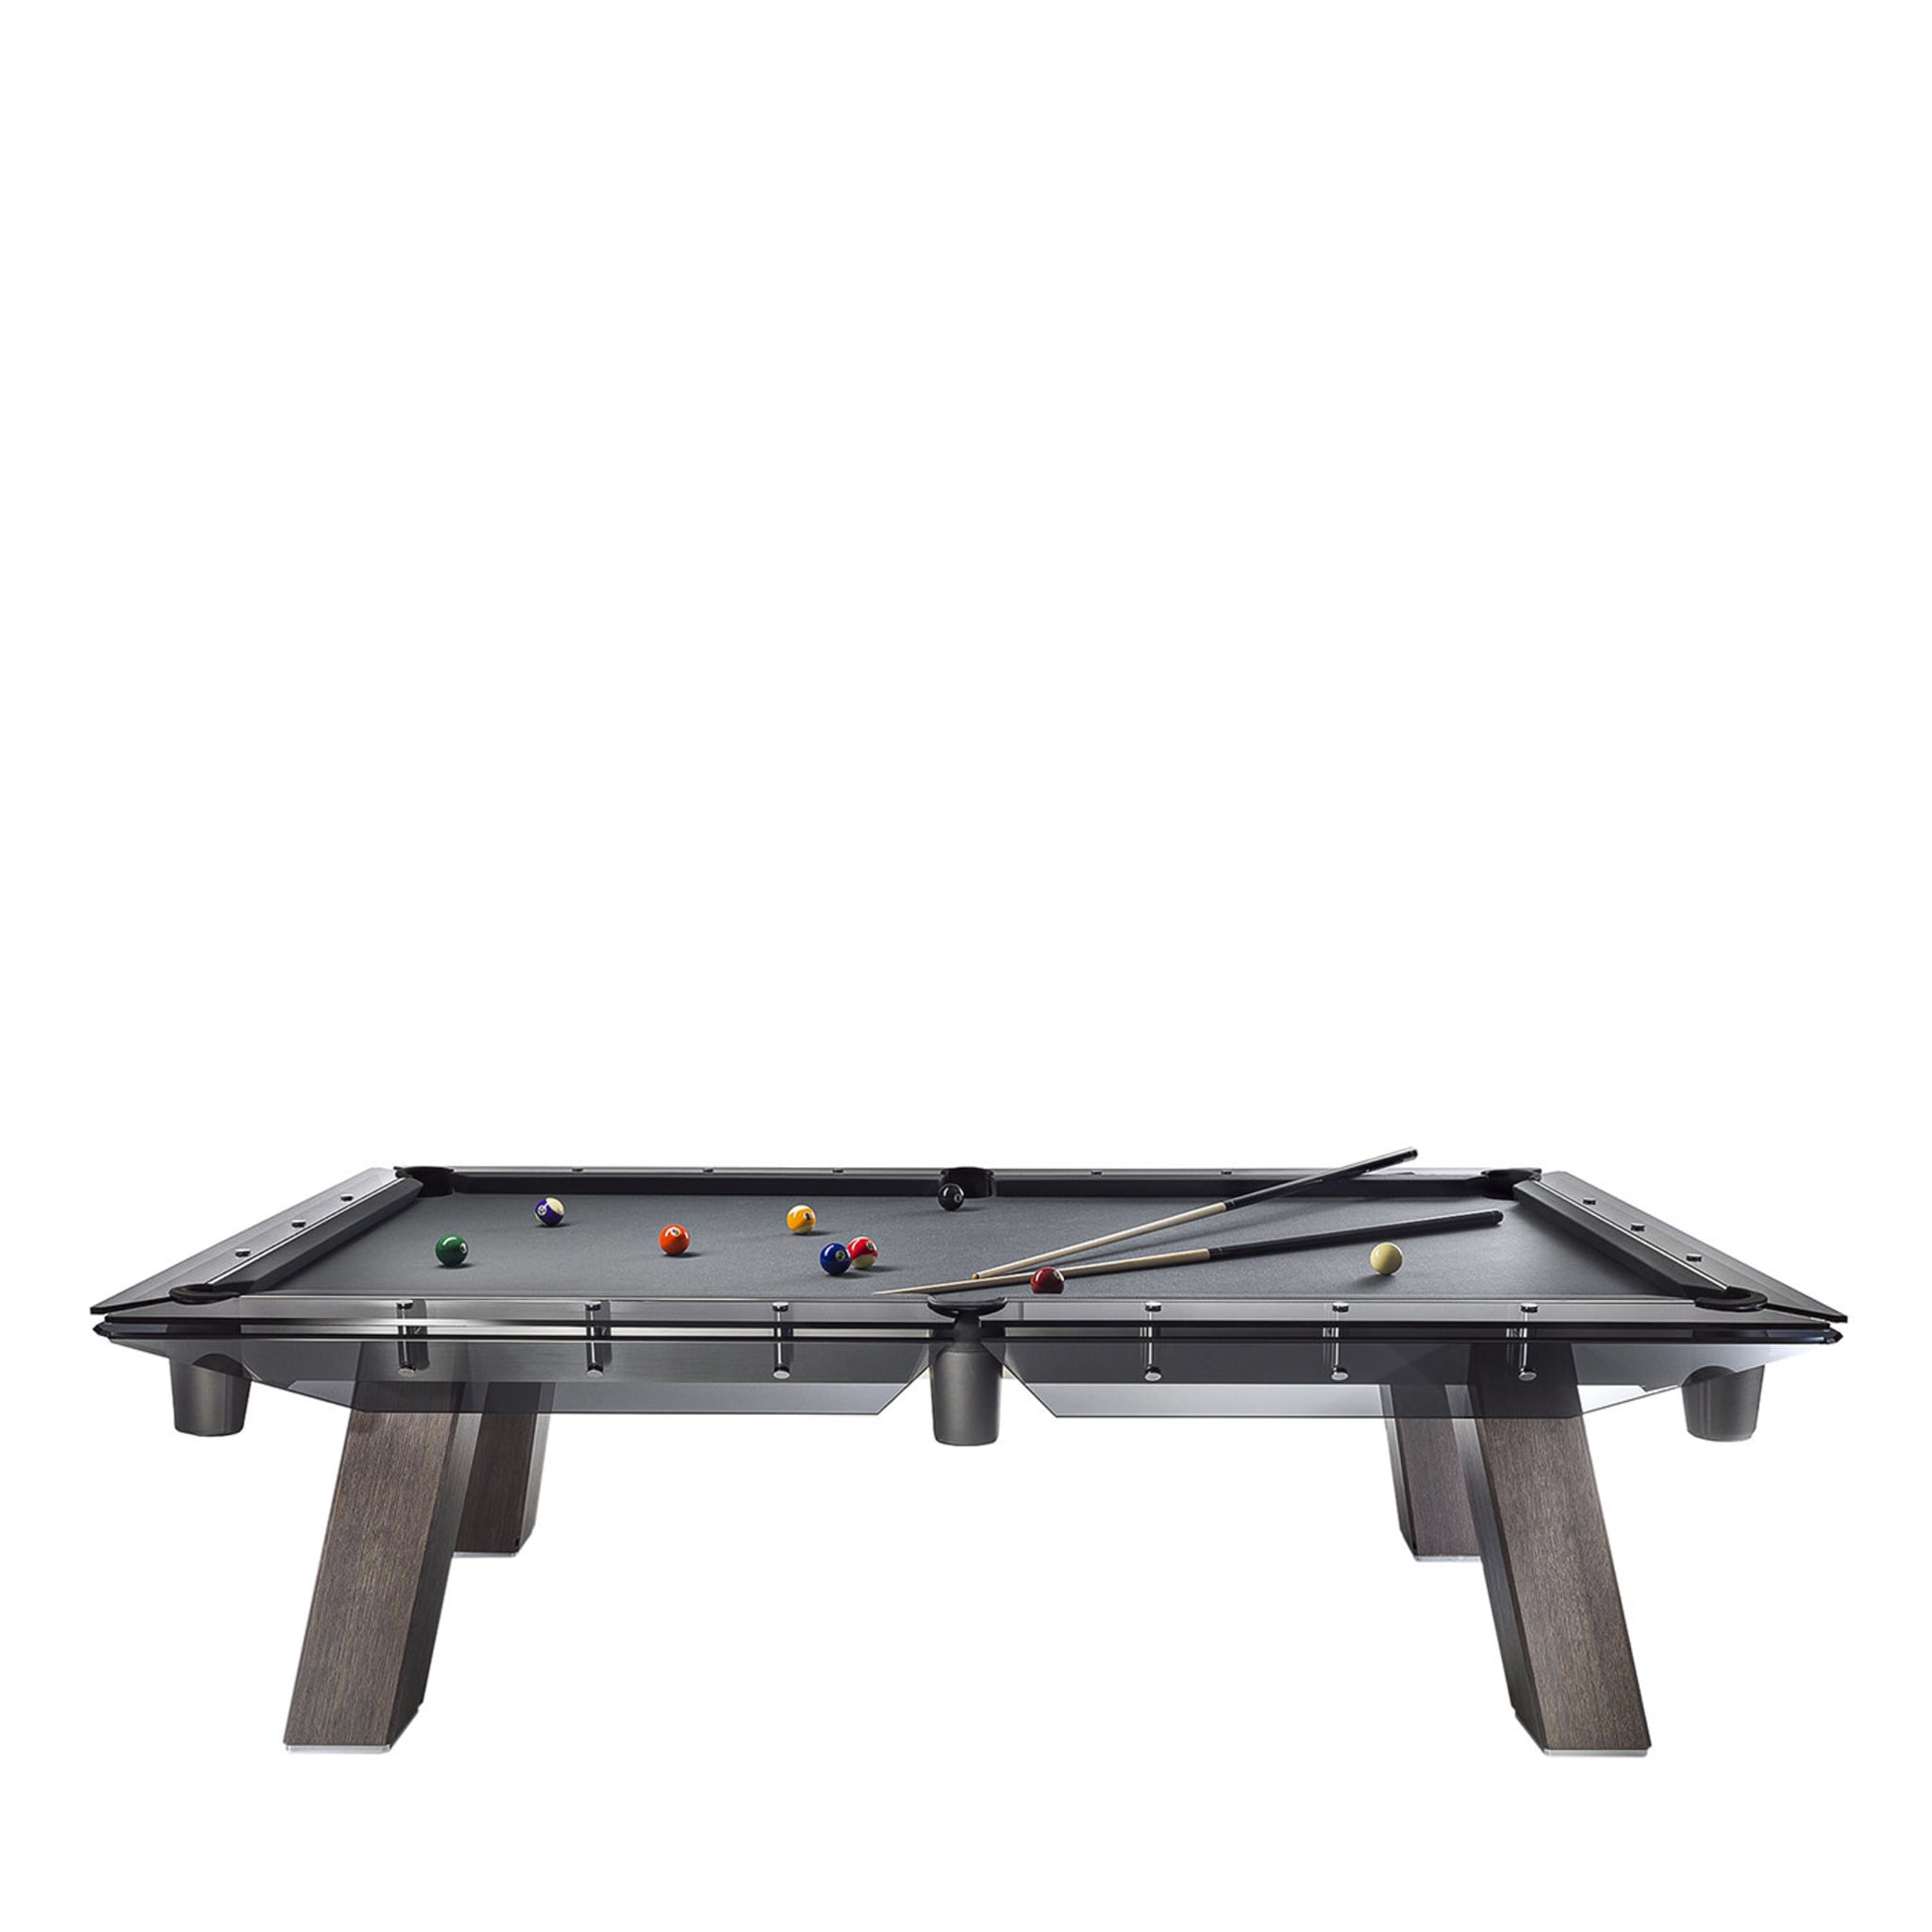 Filotto Black Pool Table with Wooden Legs - Main view